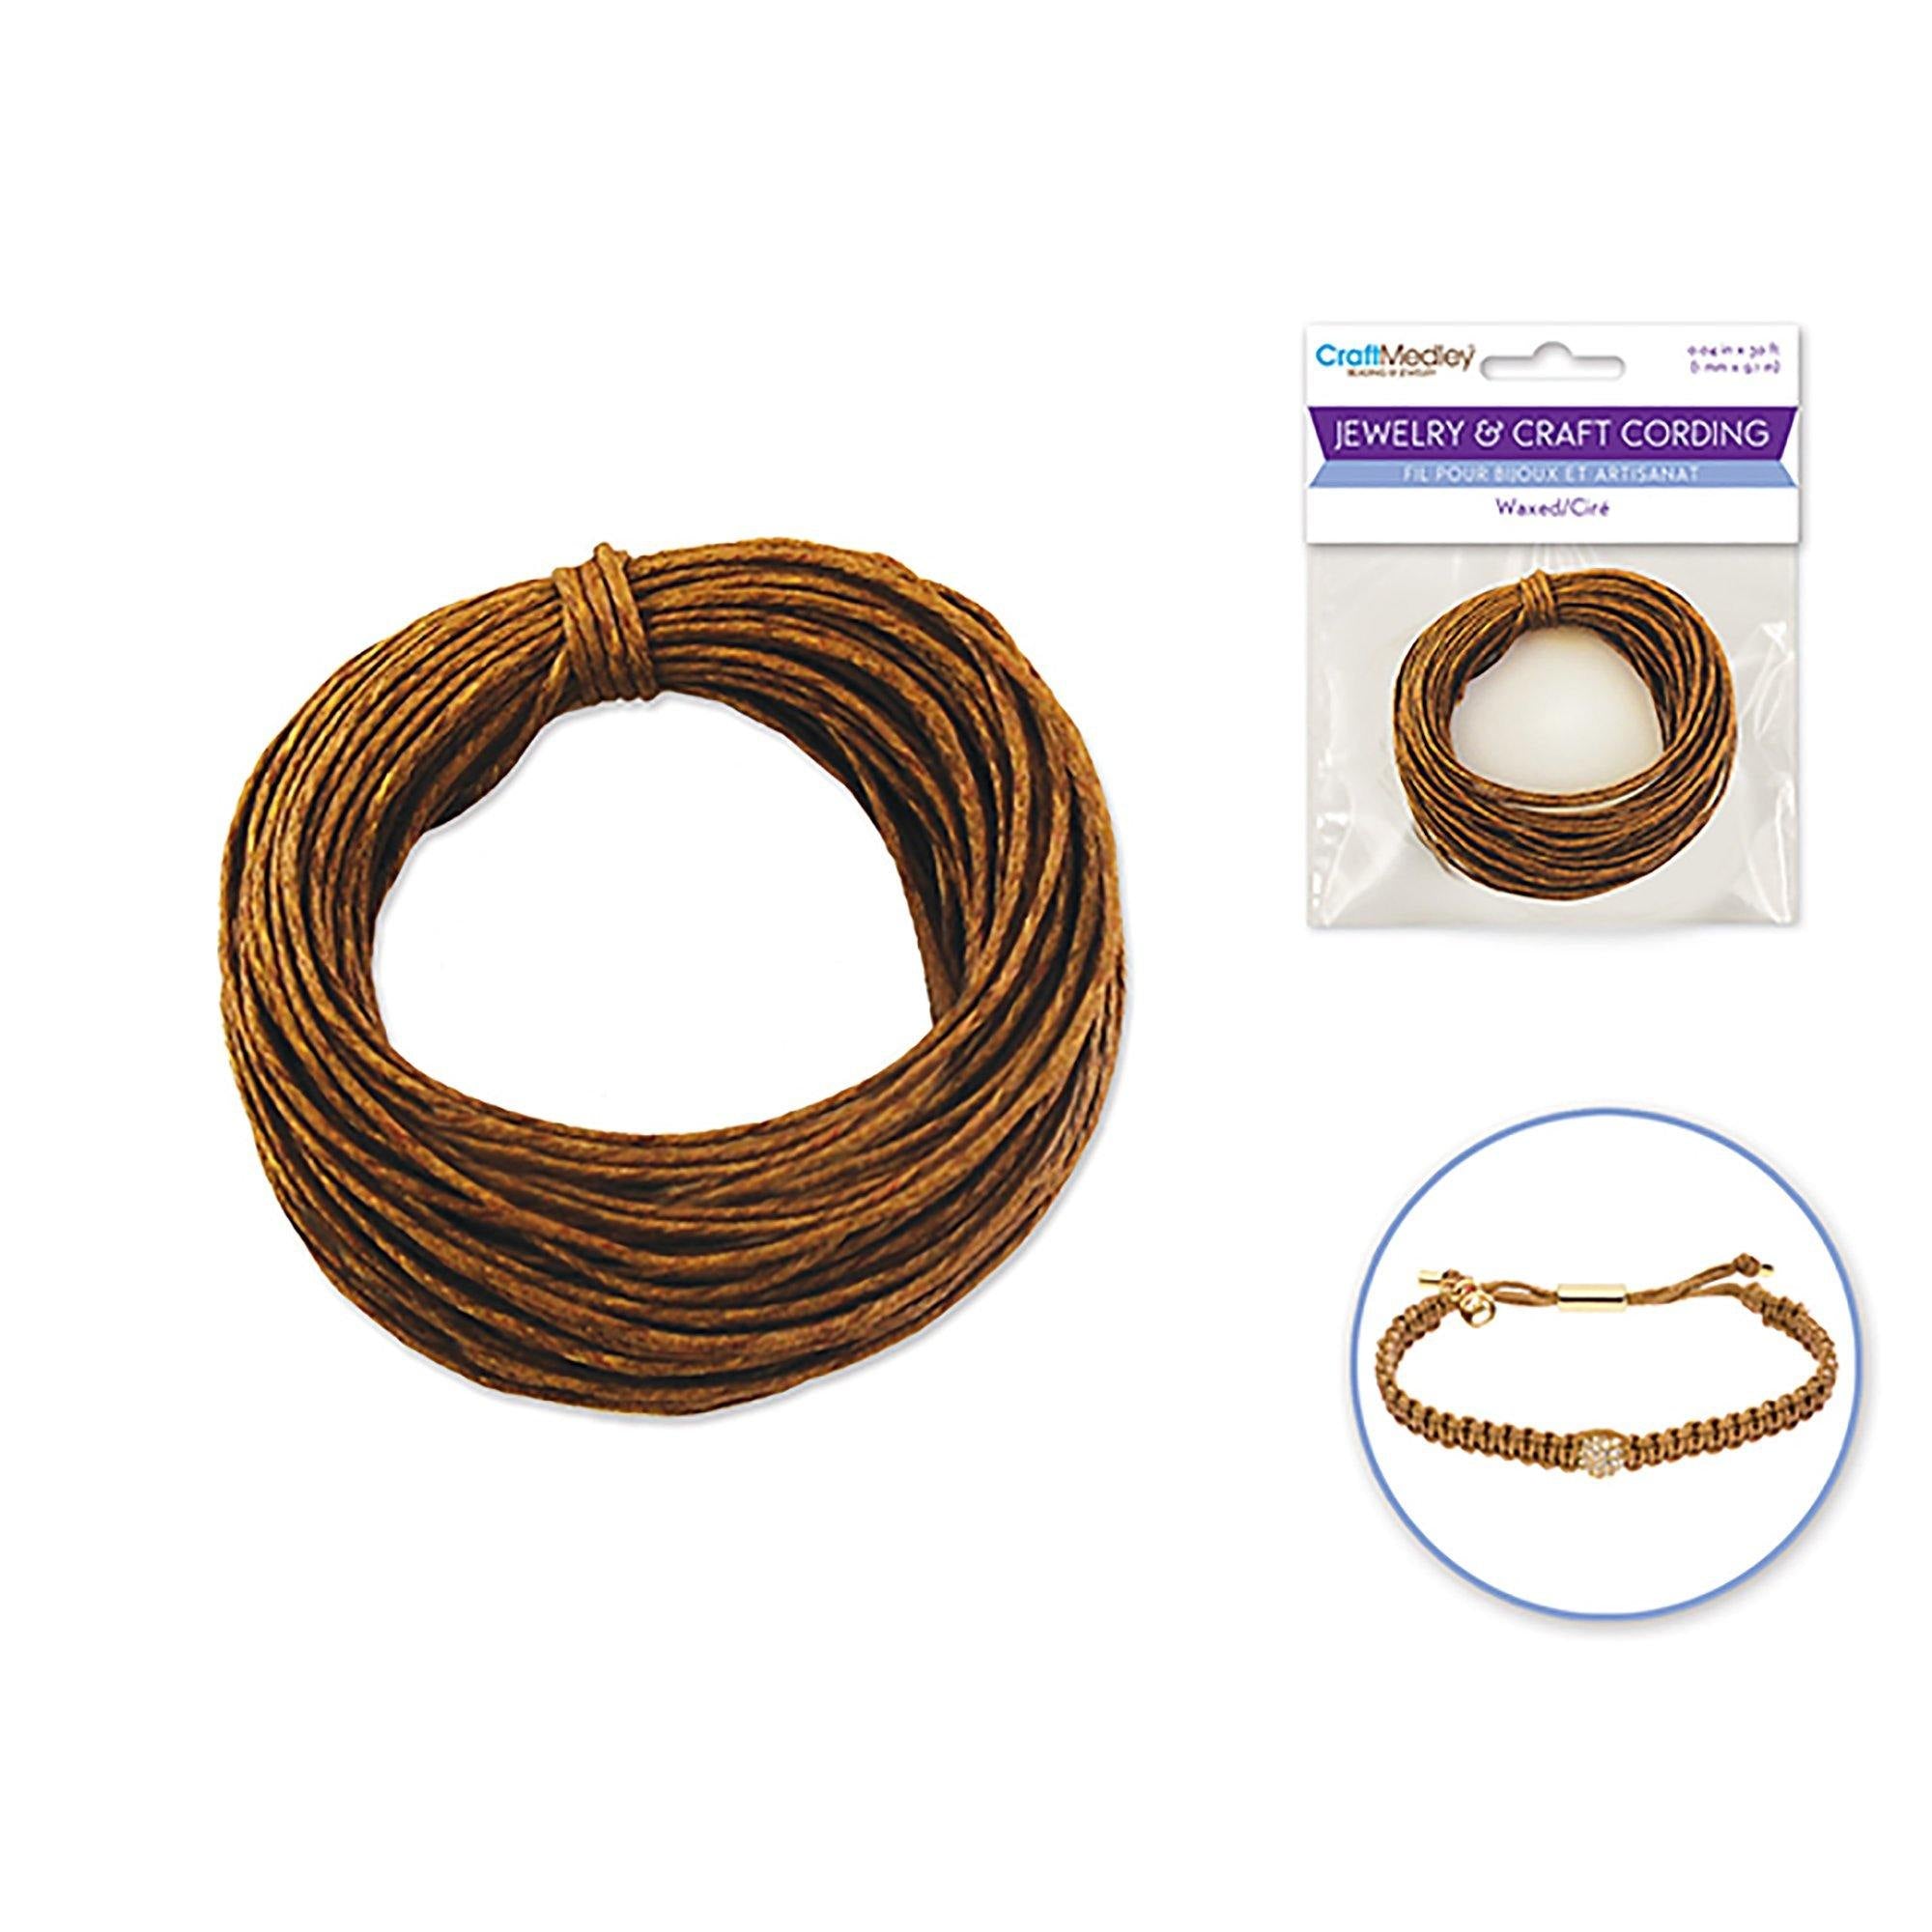 Dark Natural Jewelry/Craft Cord: 1Mmx10Yds Waxed Cord Round - Dollar Max Dépôt